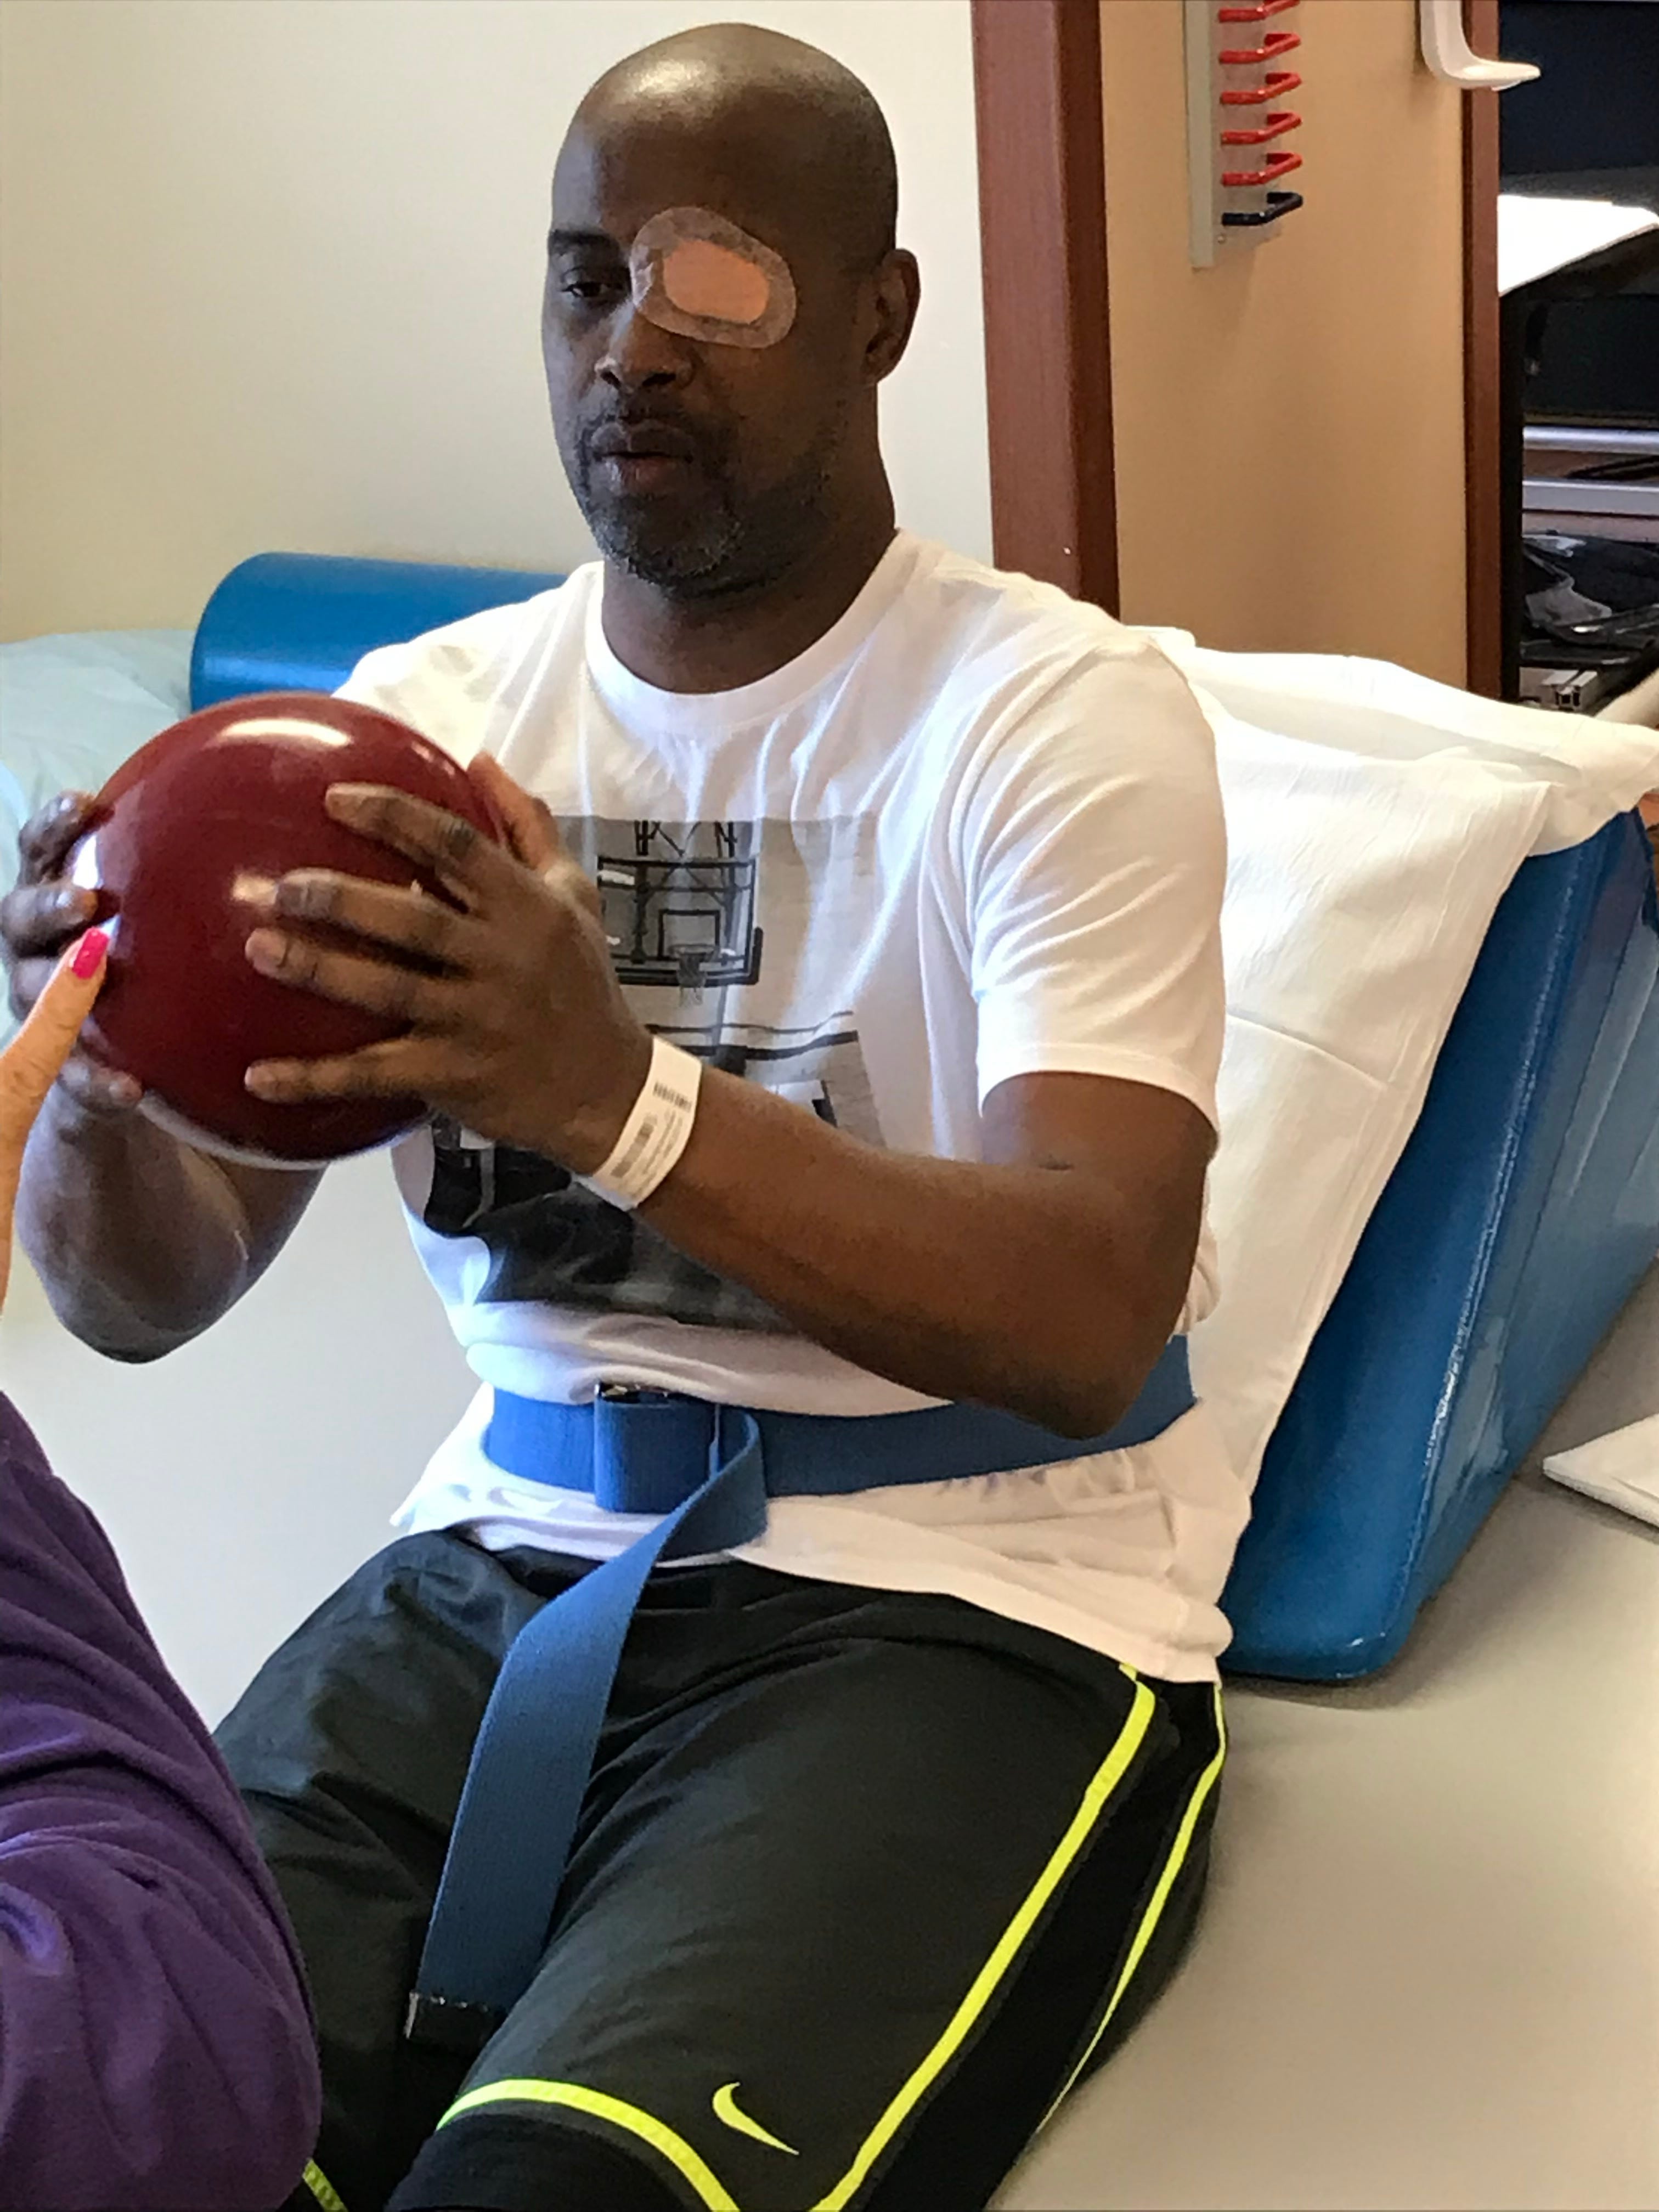 Kenny Anderson doing rehab work at Memorial Hospital in Florida, after his stroke Feb.  23, 2019.